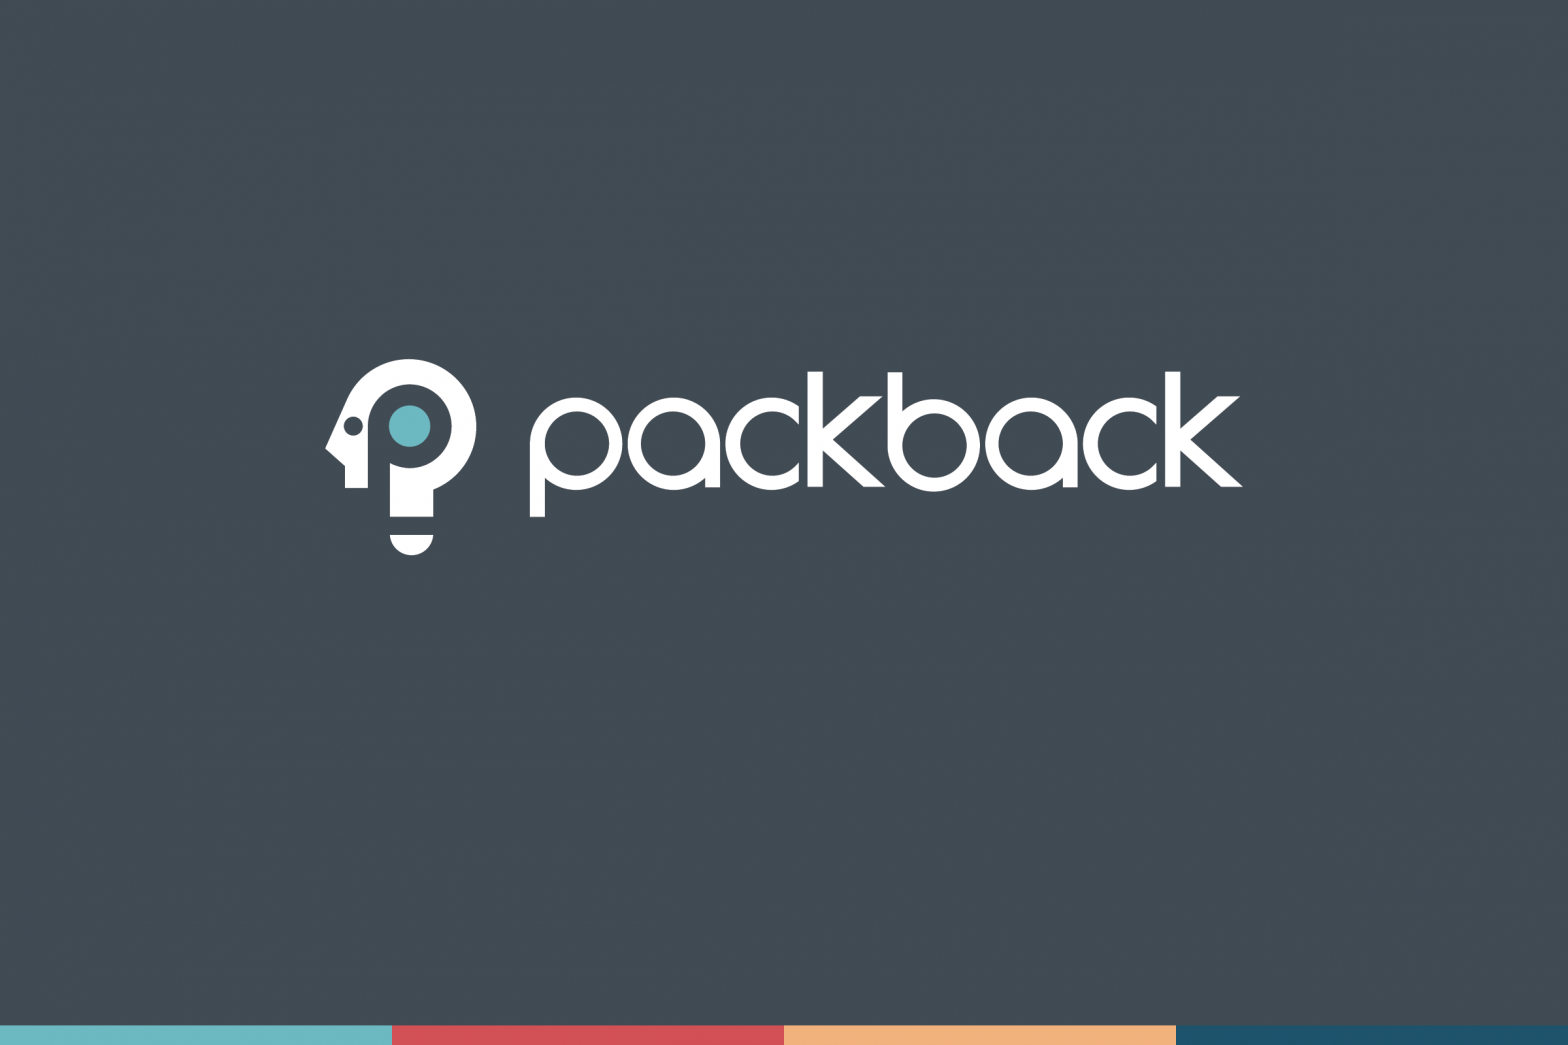 Blog cover image featuring the Packback logo on a dark grey background.